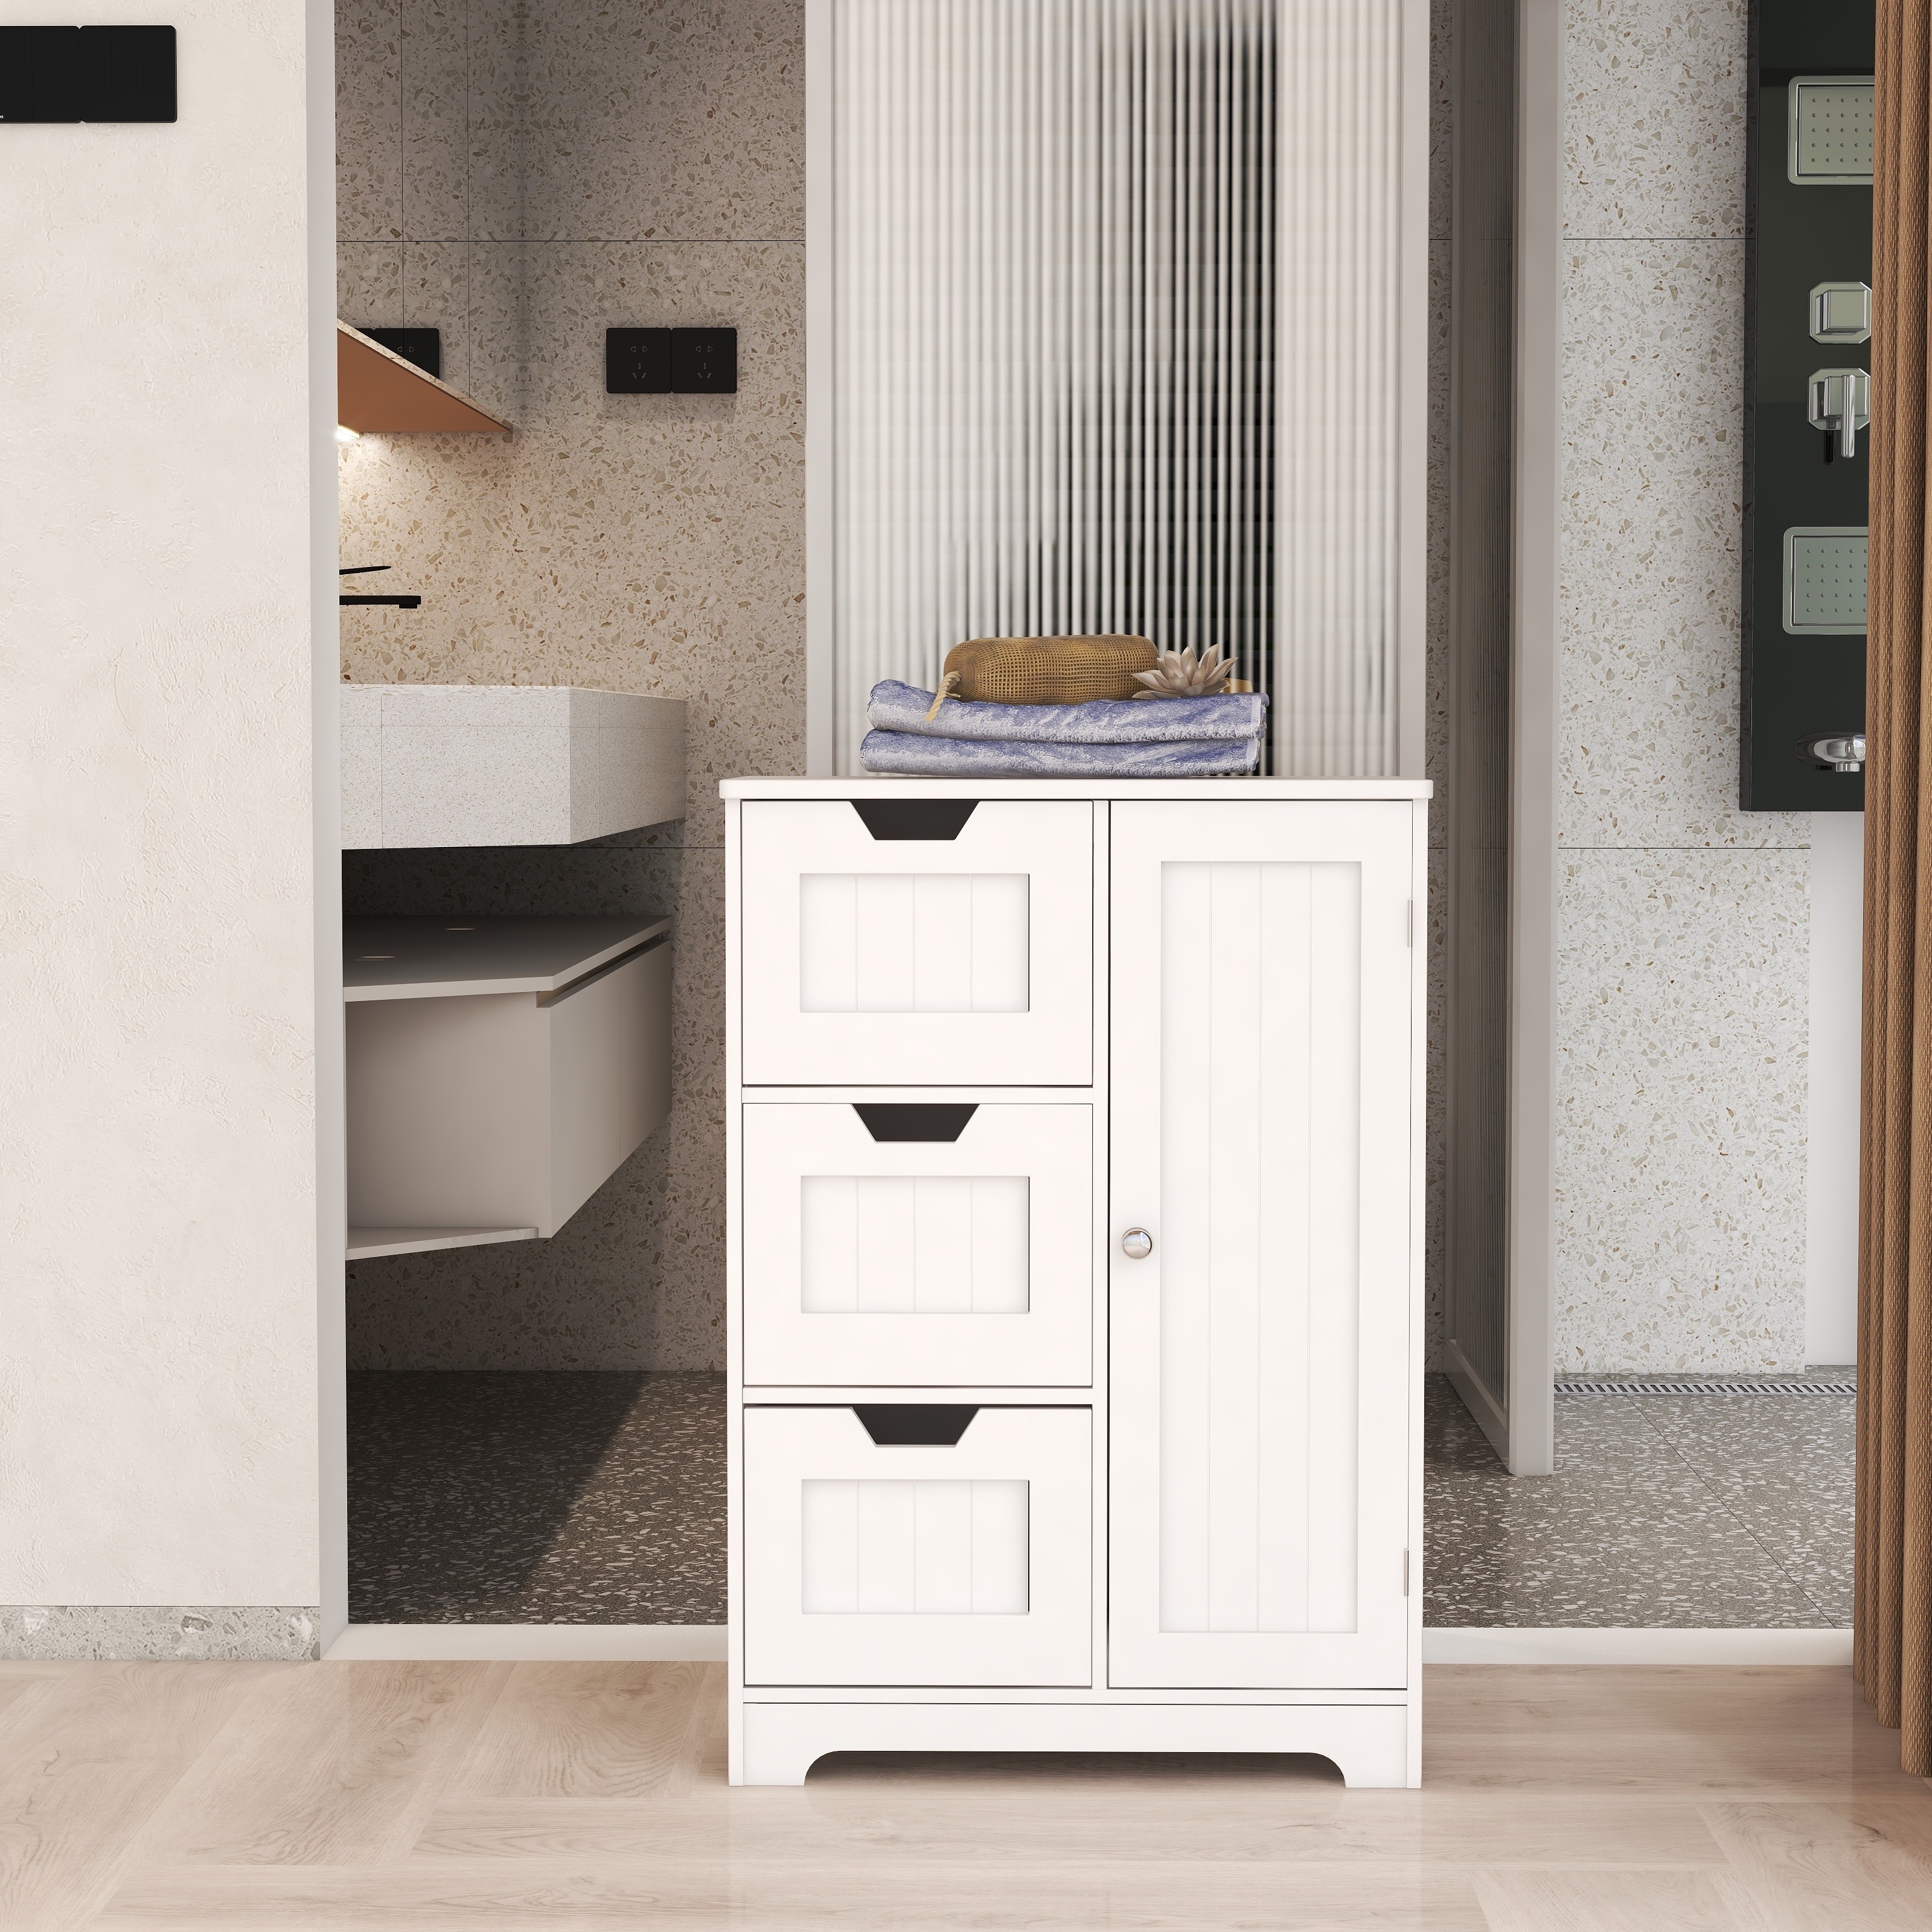 https://ak1.ostkcdn.com/images/products/is/images/direct/5171e6546059d1e431b537cd90e2647552d8ba88/White-freestanding-storage-cabinet-for-bathroom-and-living-room-%28one-door-with-three-drawers%29.jpg